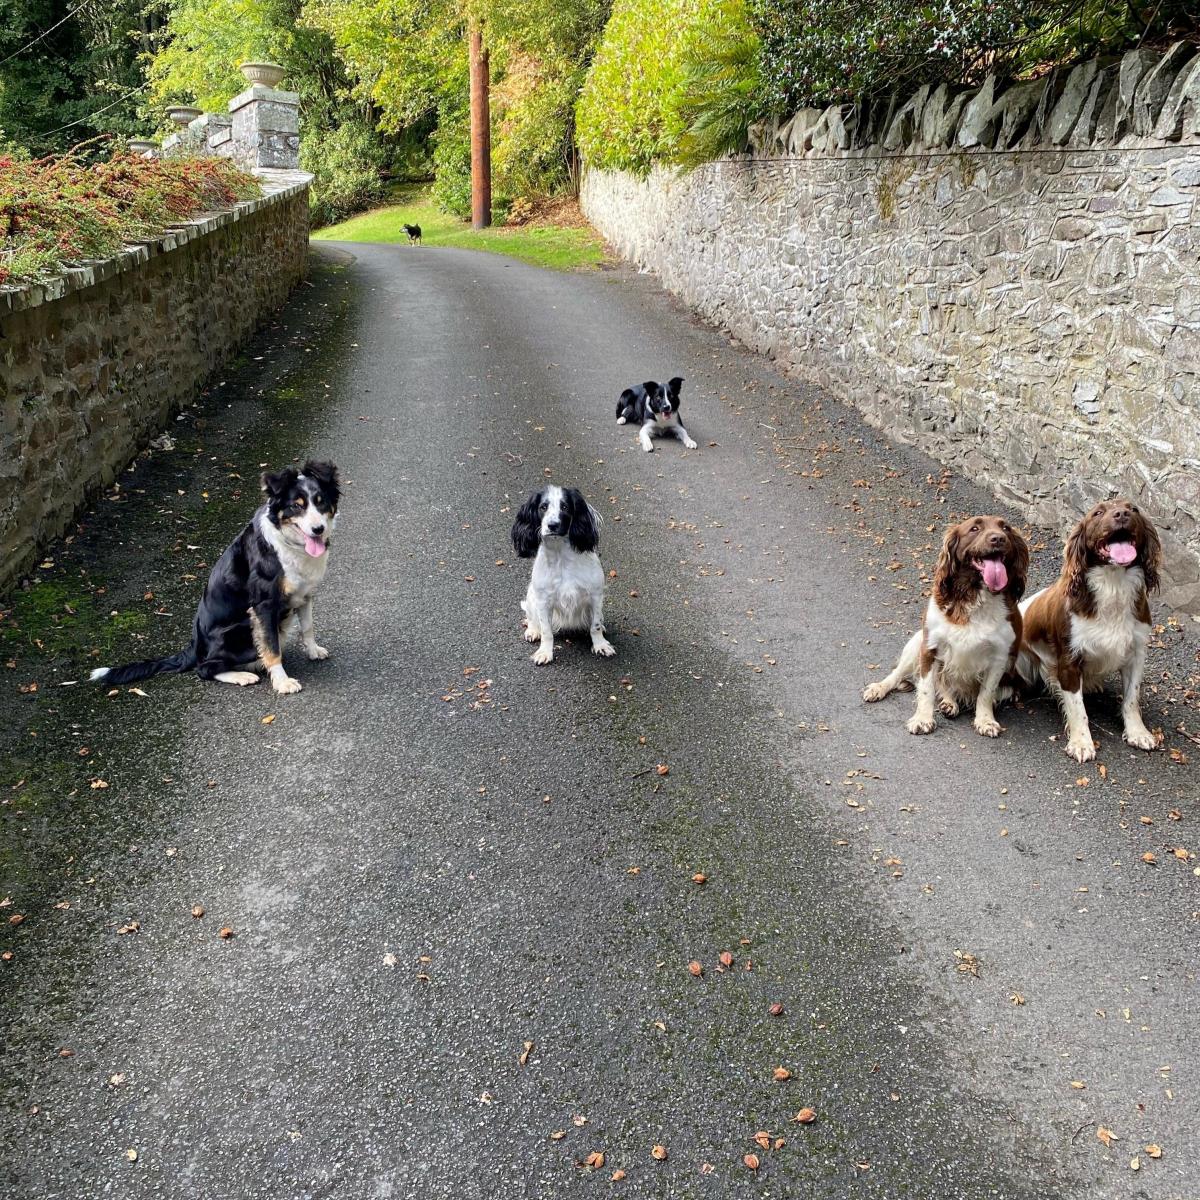 Rachel Spence (Scottish Borders) - How many dogs in one photo